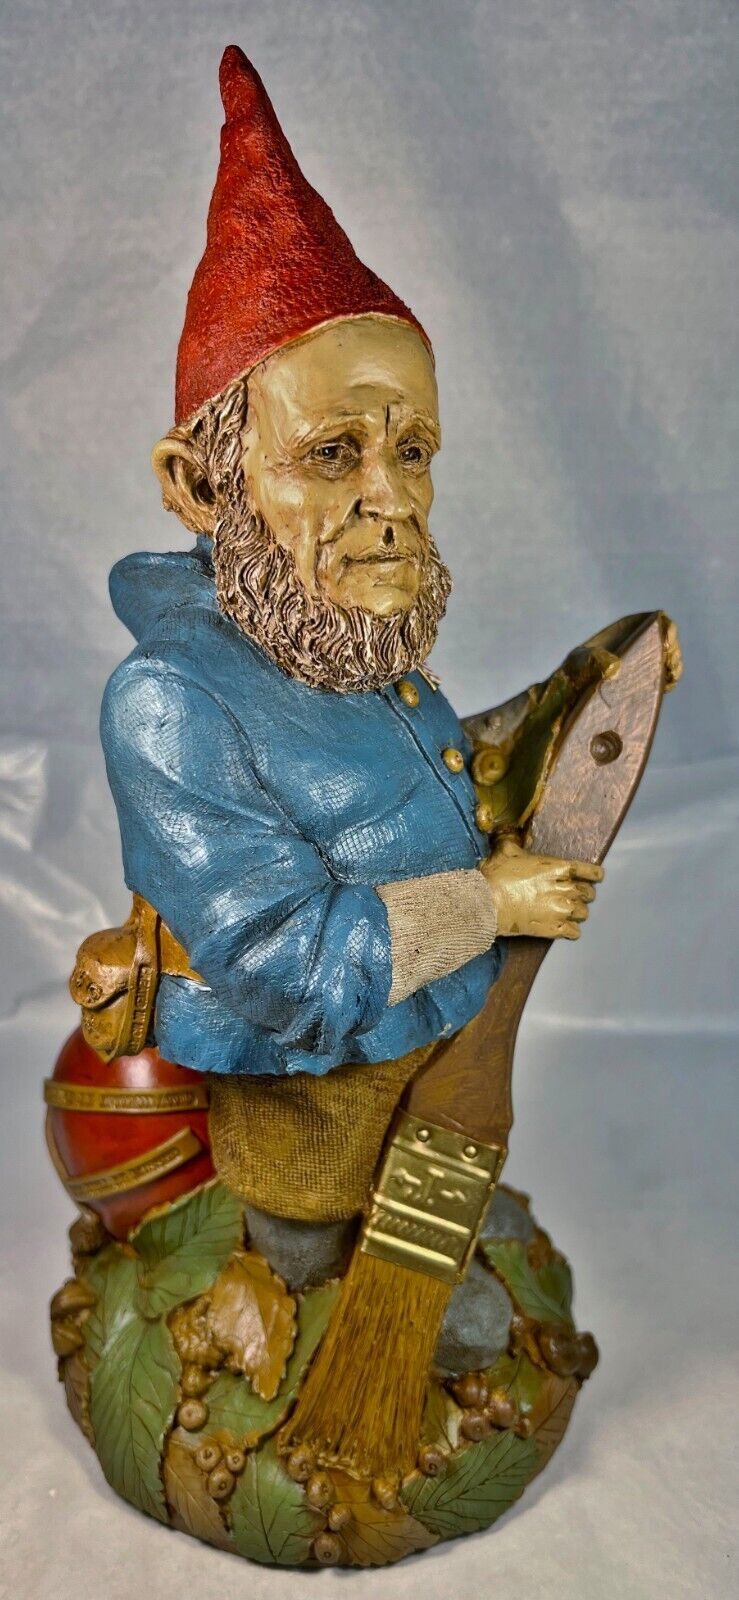 RUDY-R 2002~Tom Clark Gnome~Cairn Studio Item #5497~2nd Edition #2~Hand Signed